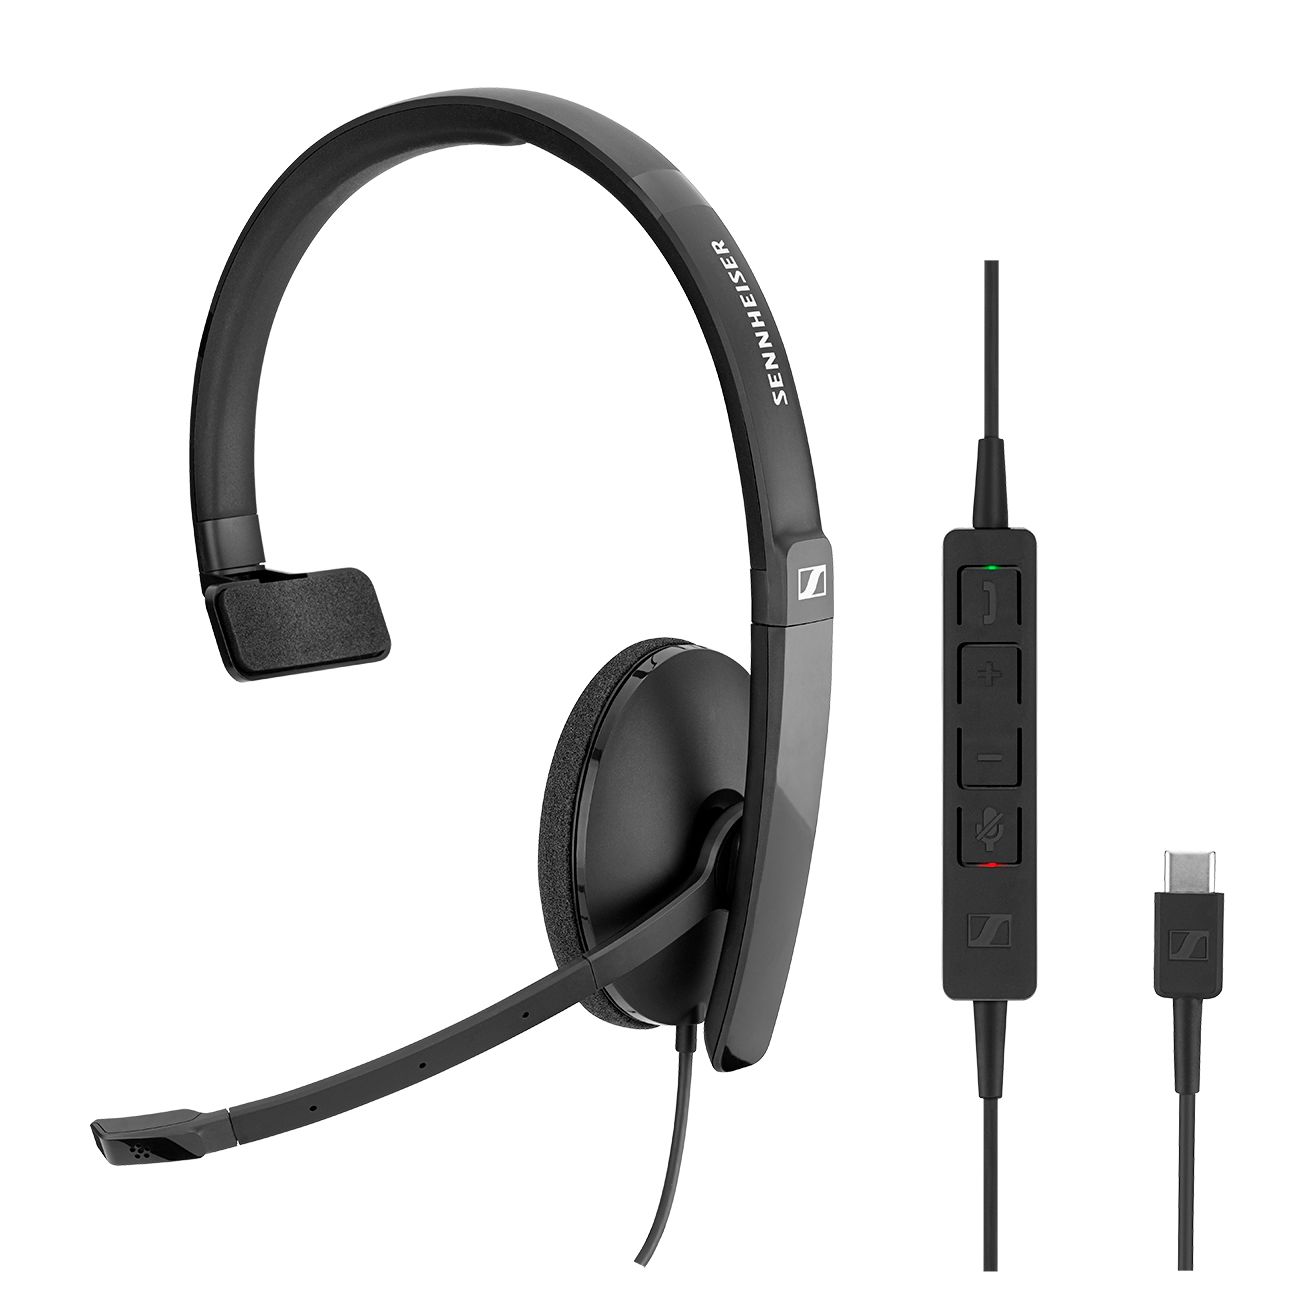 EPOS | Sennheiser ADAPT SC130 USB-C Wired monaural USB headset. Skype for Business certified and UC optimized.